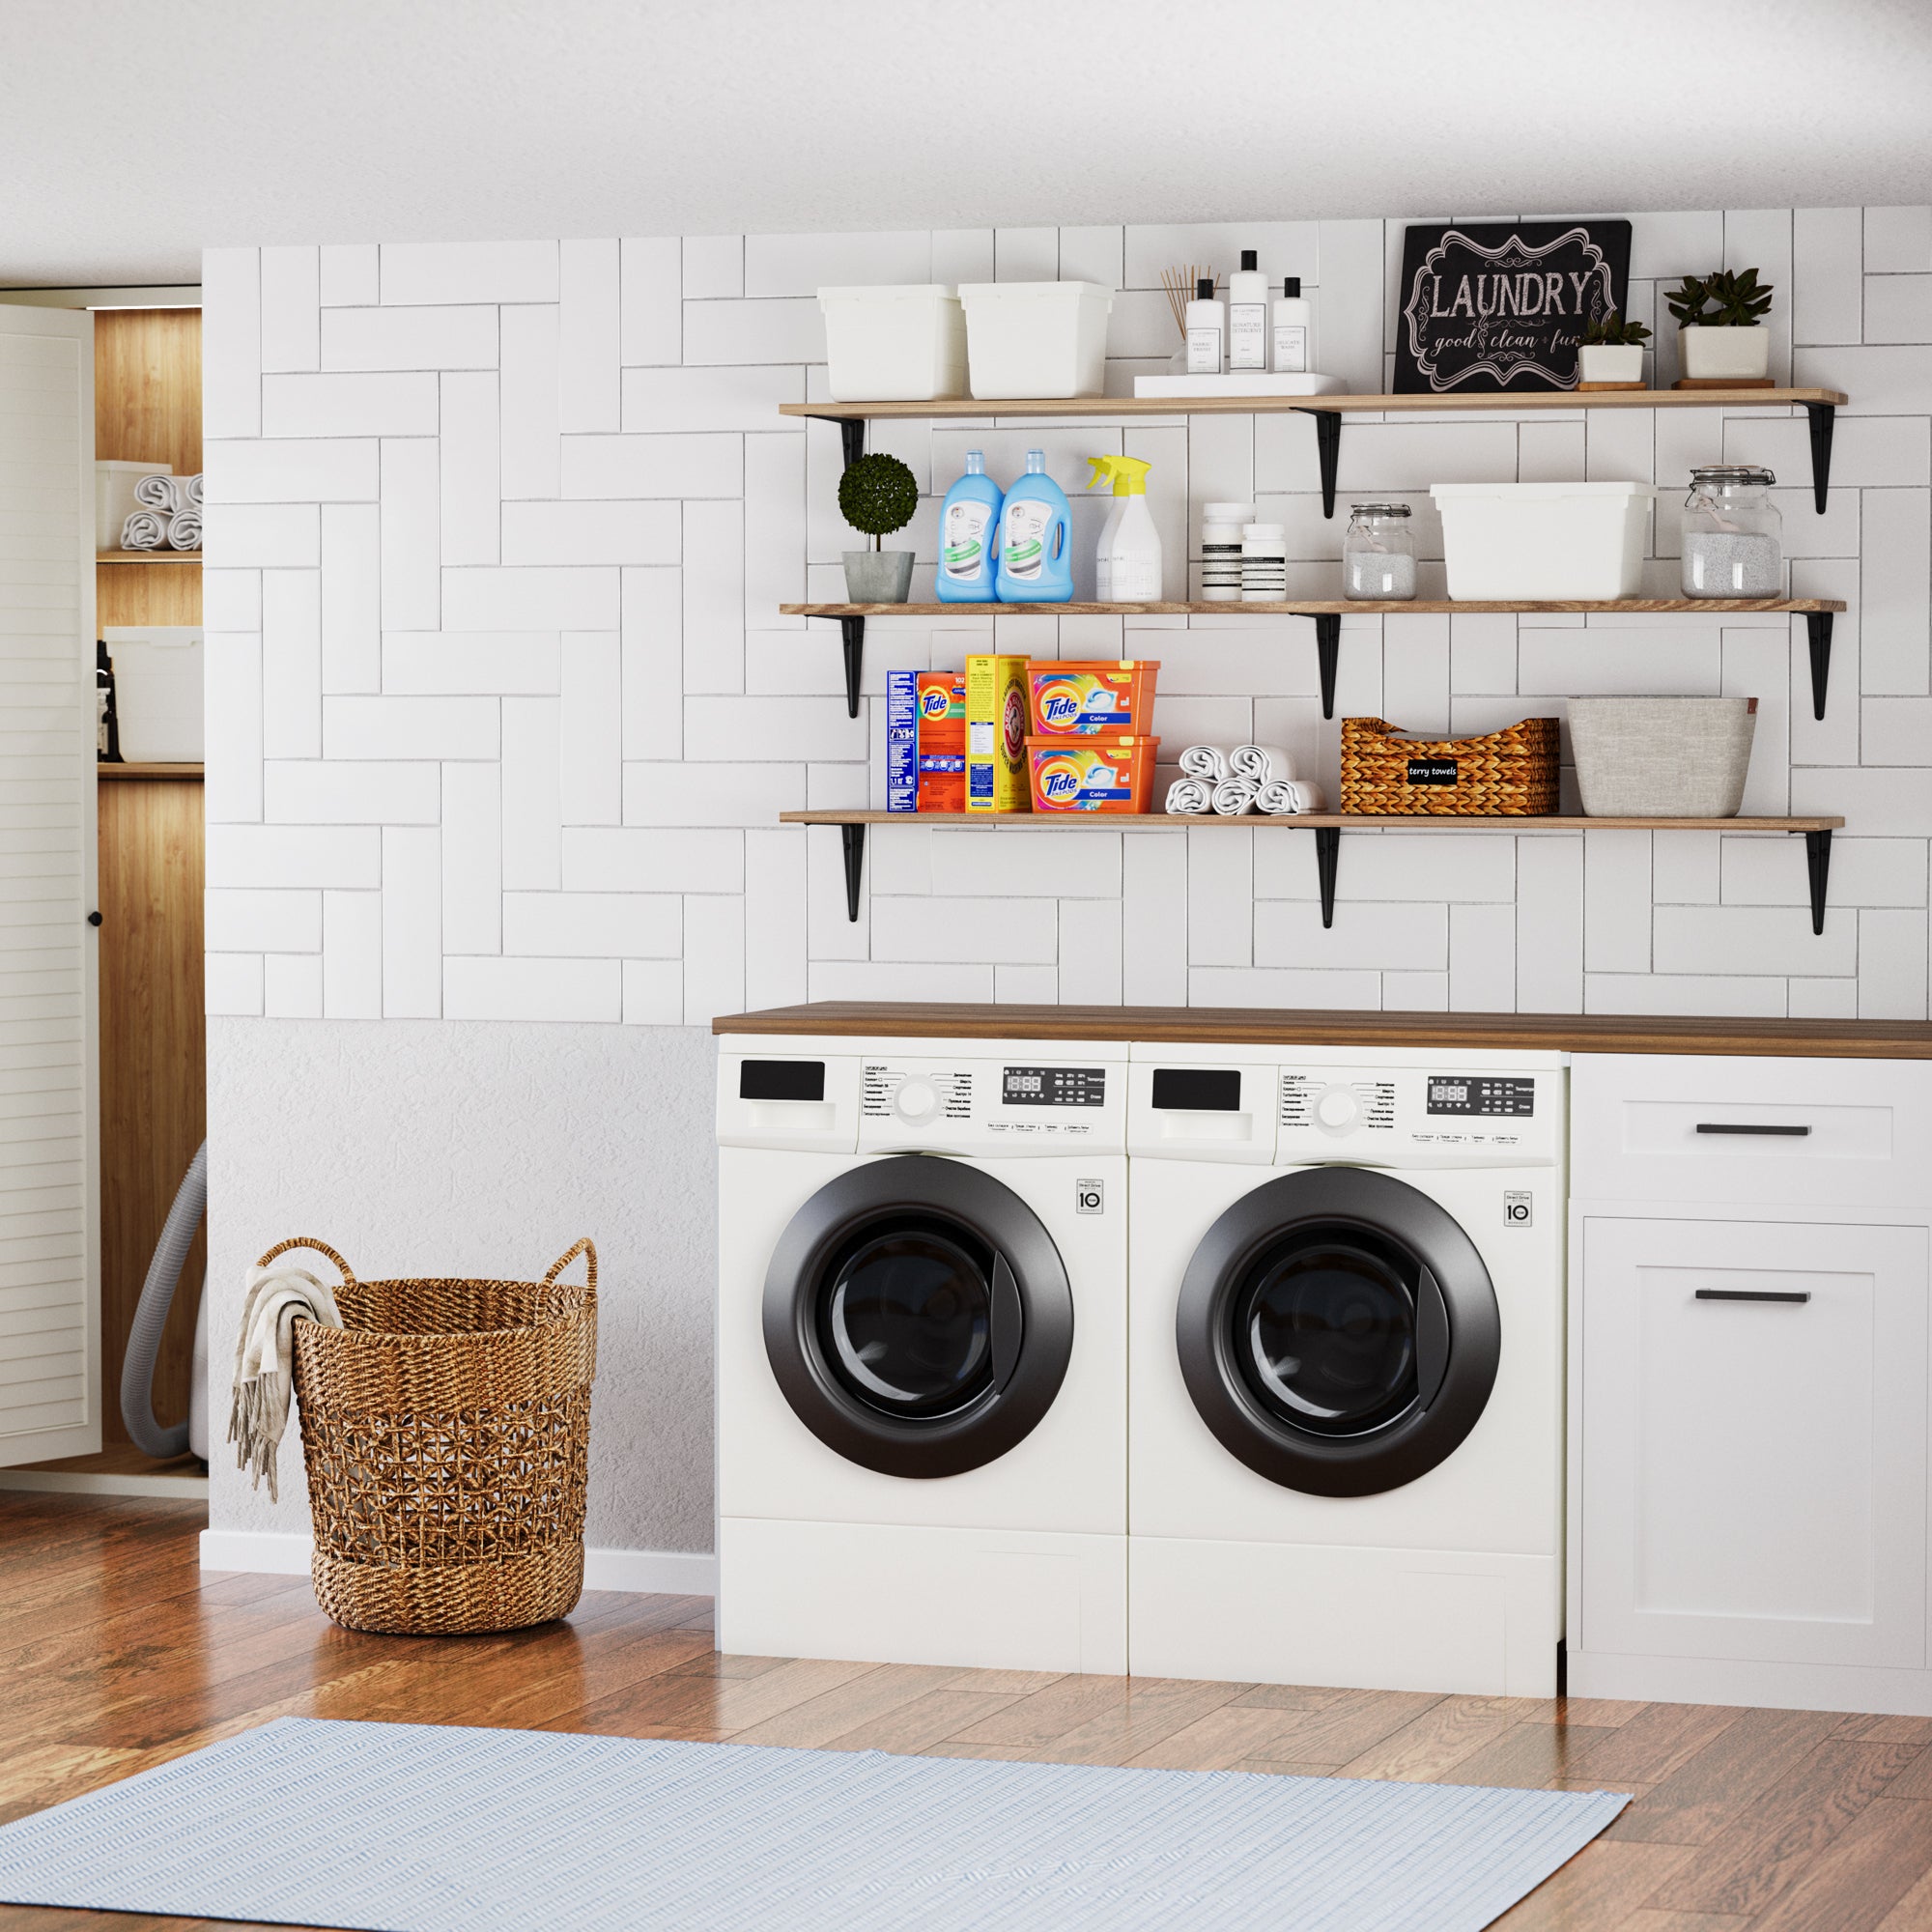 Efficiently organized laundry room with burnt laundy room shelves above washing machines holding cleaning supplies and decorative items.